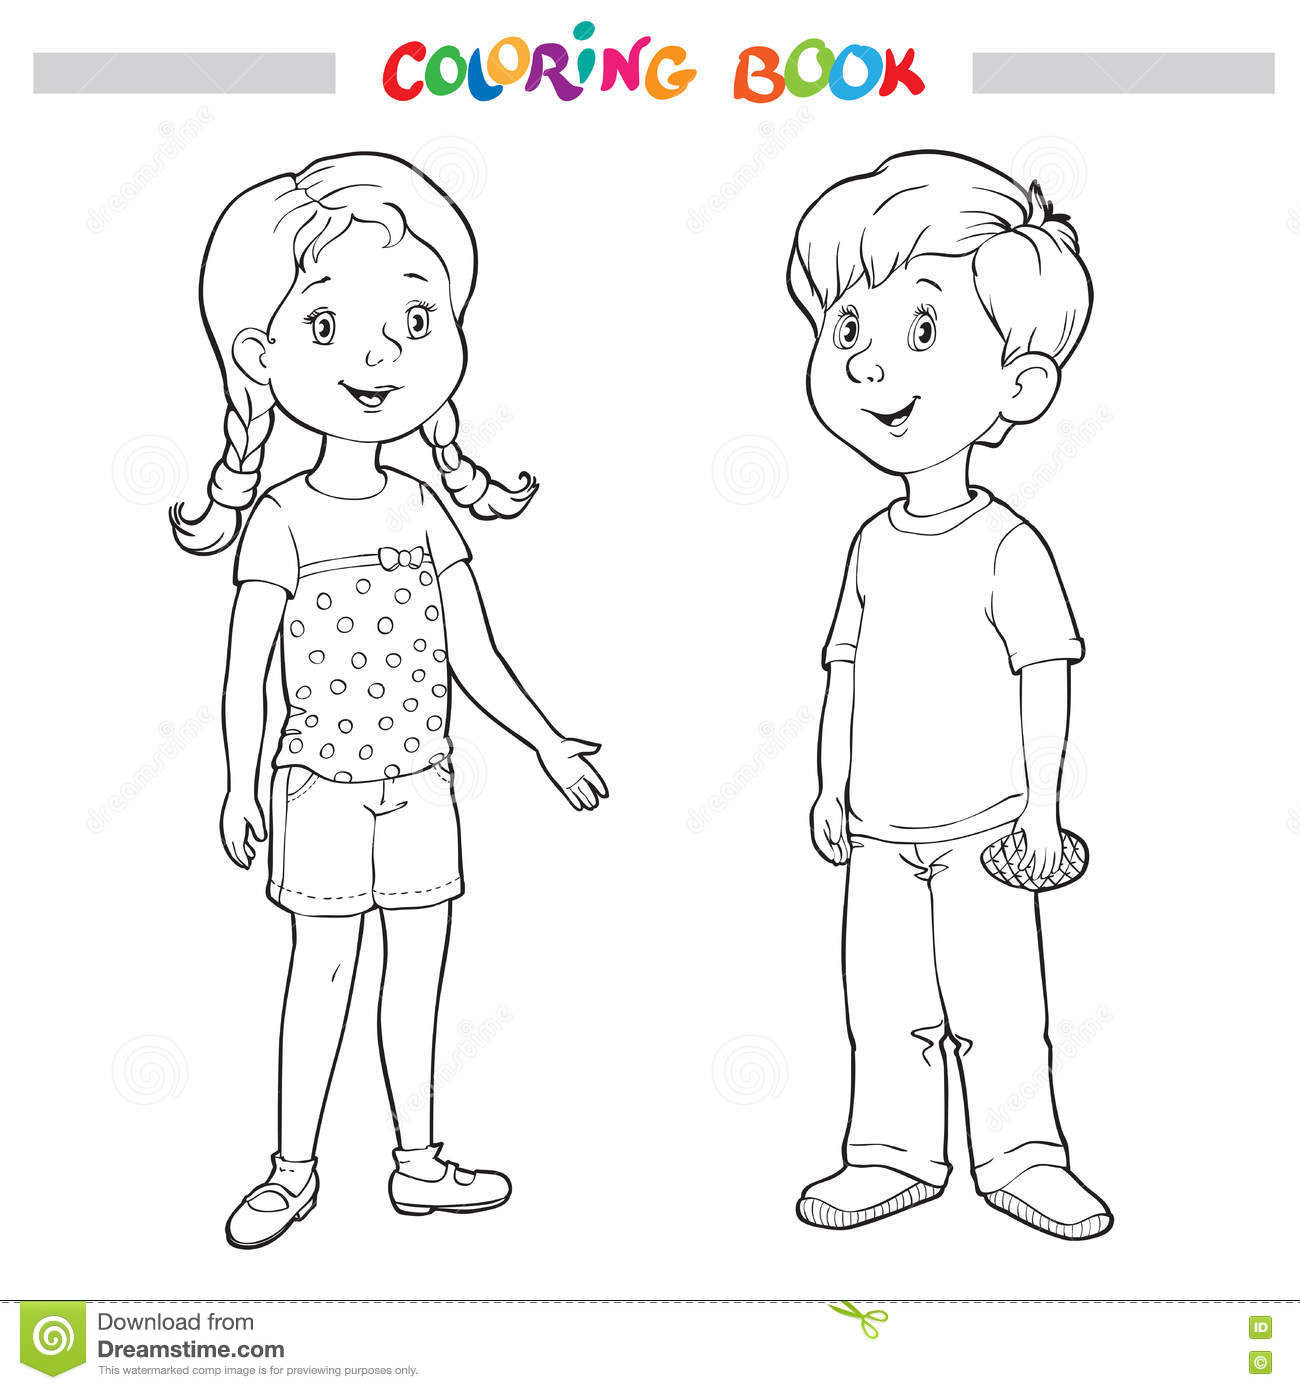 Coloring Pages For Girls And Boys
 Coloring Book Page Boy And Girl Stock Vector